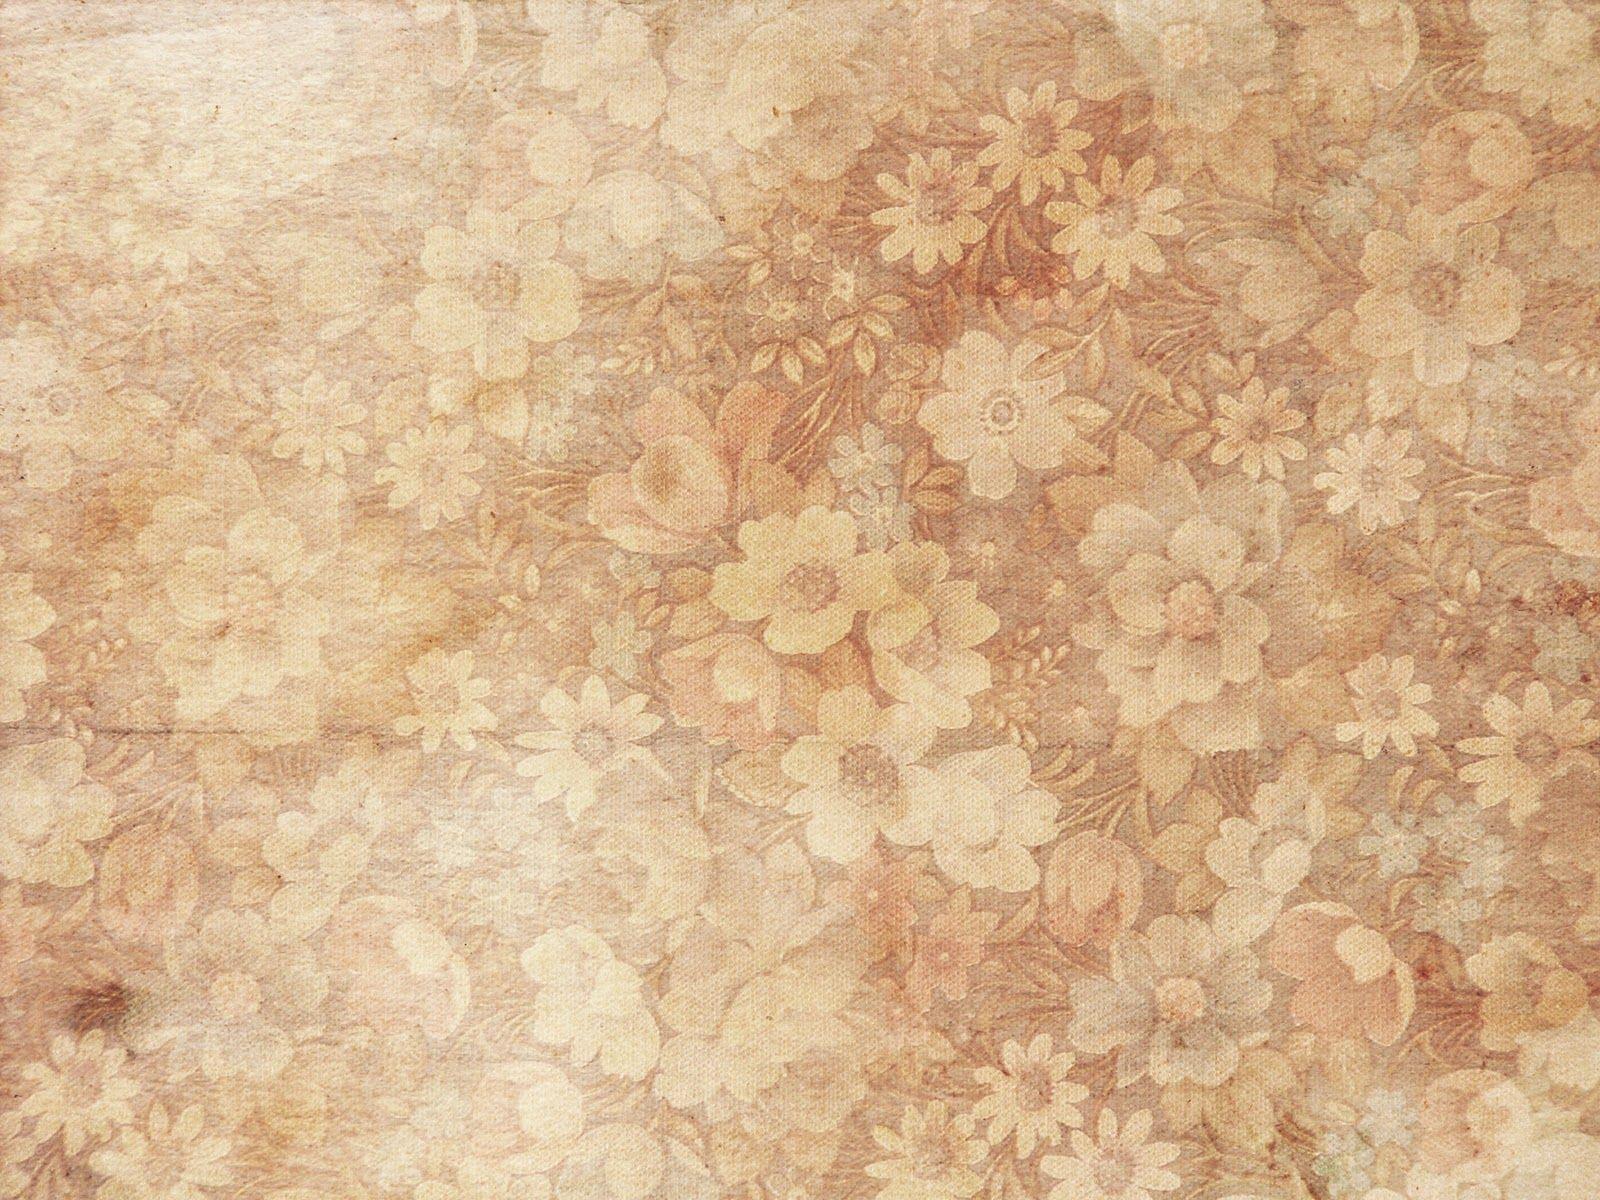 Texture Download: Floral background texture download free HD. Фон